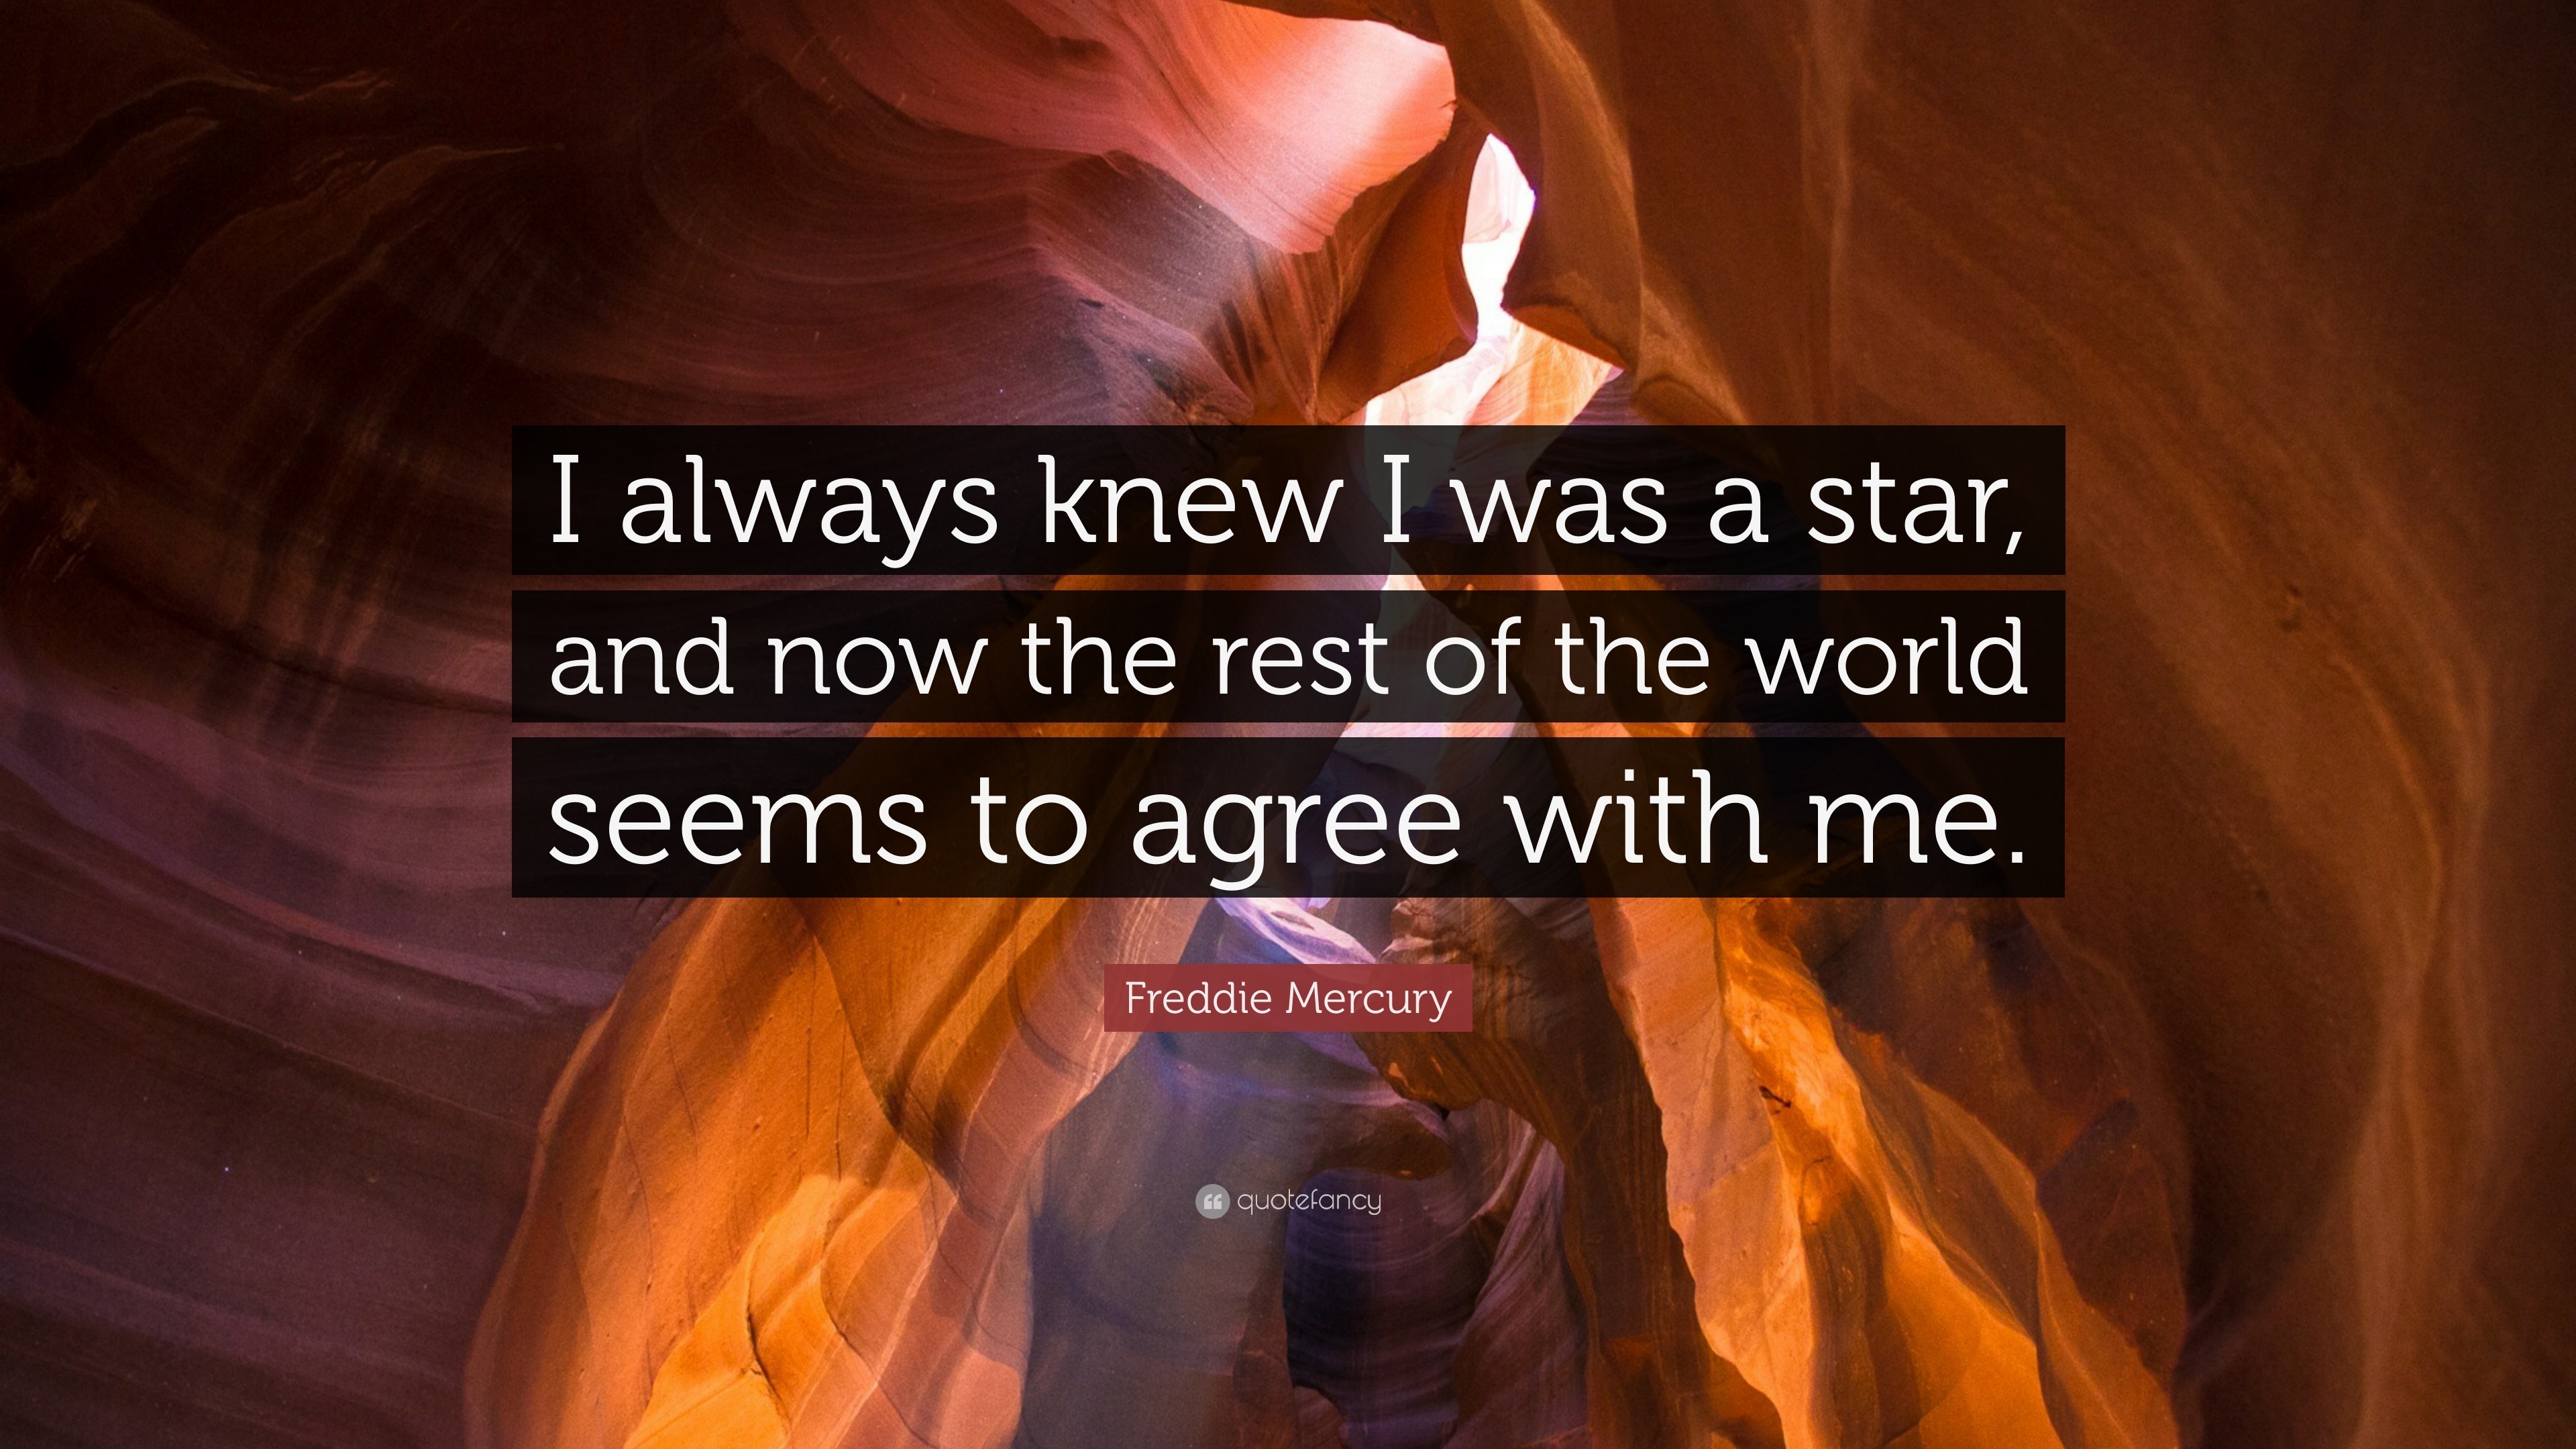 3840x2160 Freddie Mercury Quote: “I always knew I was a star, and now the